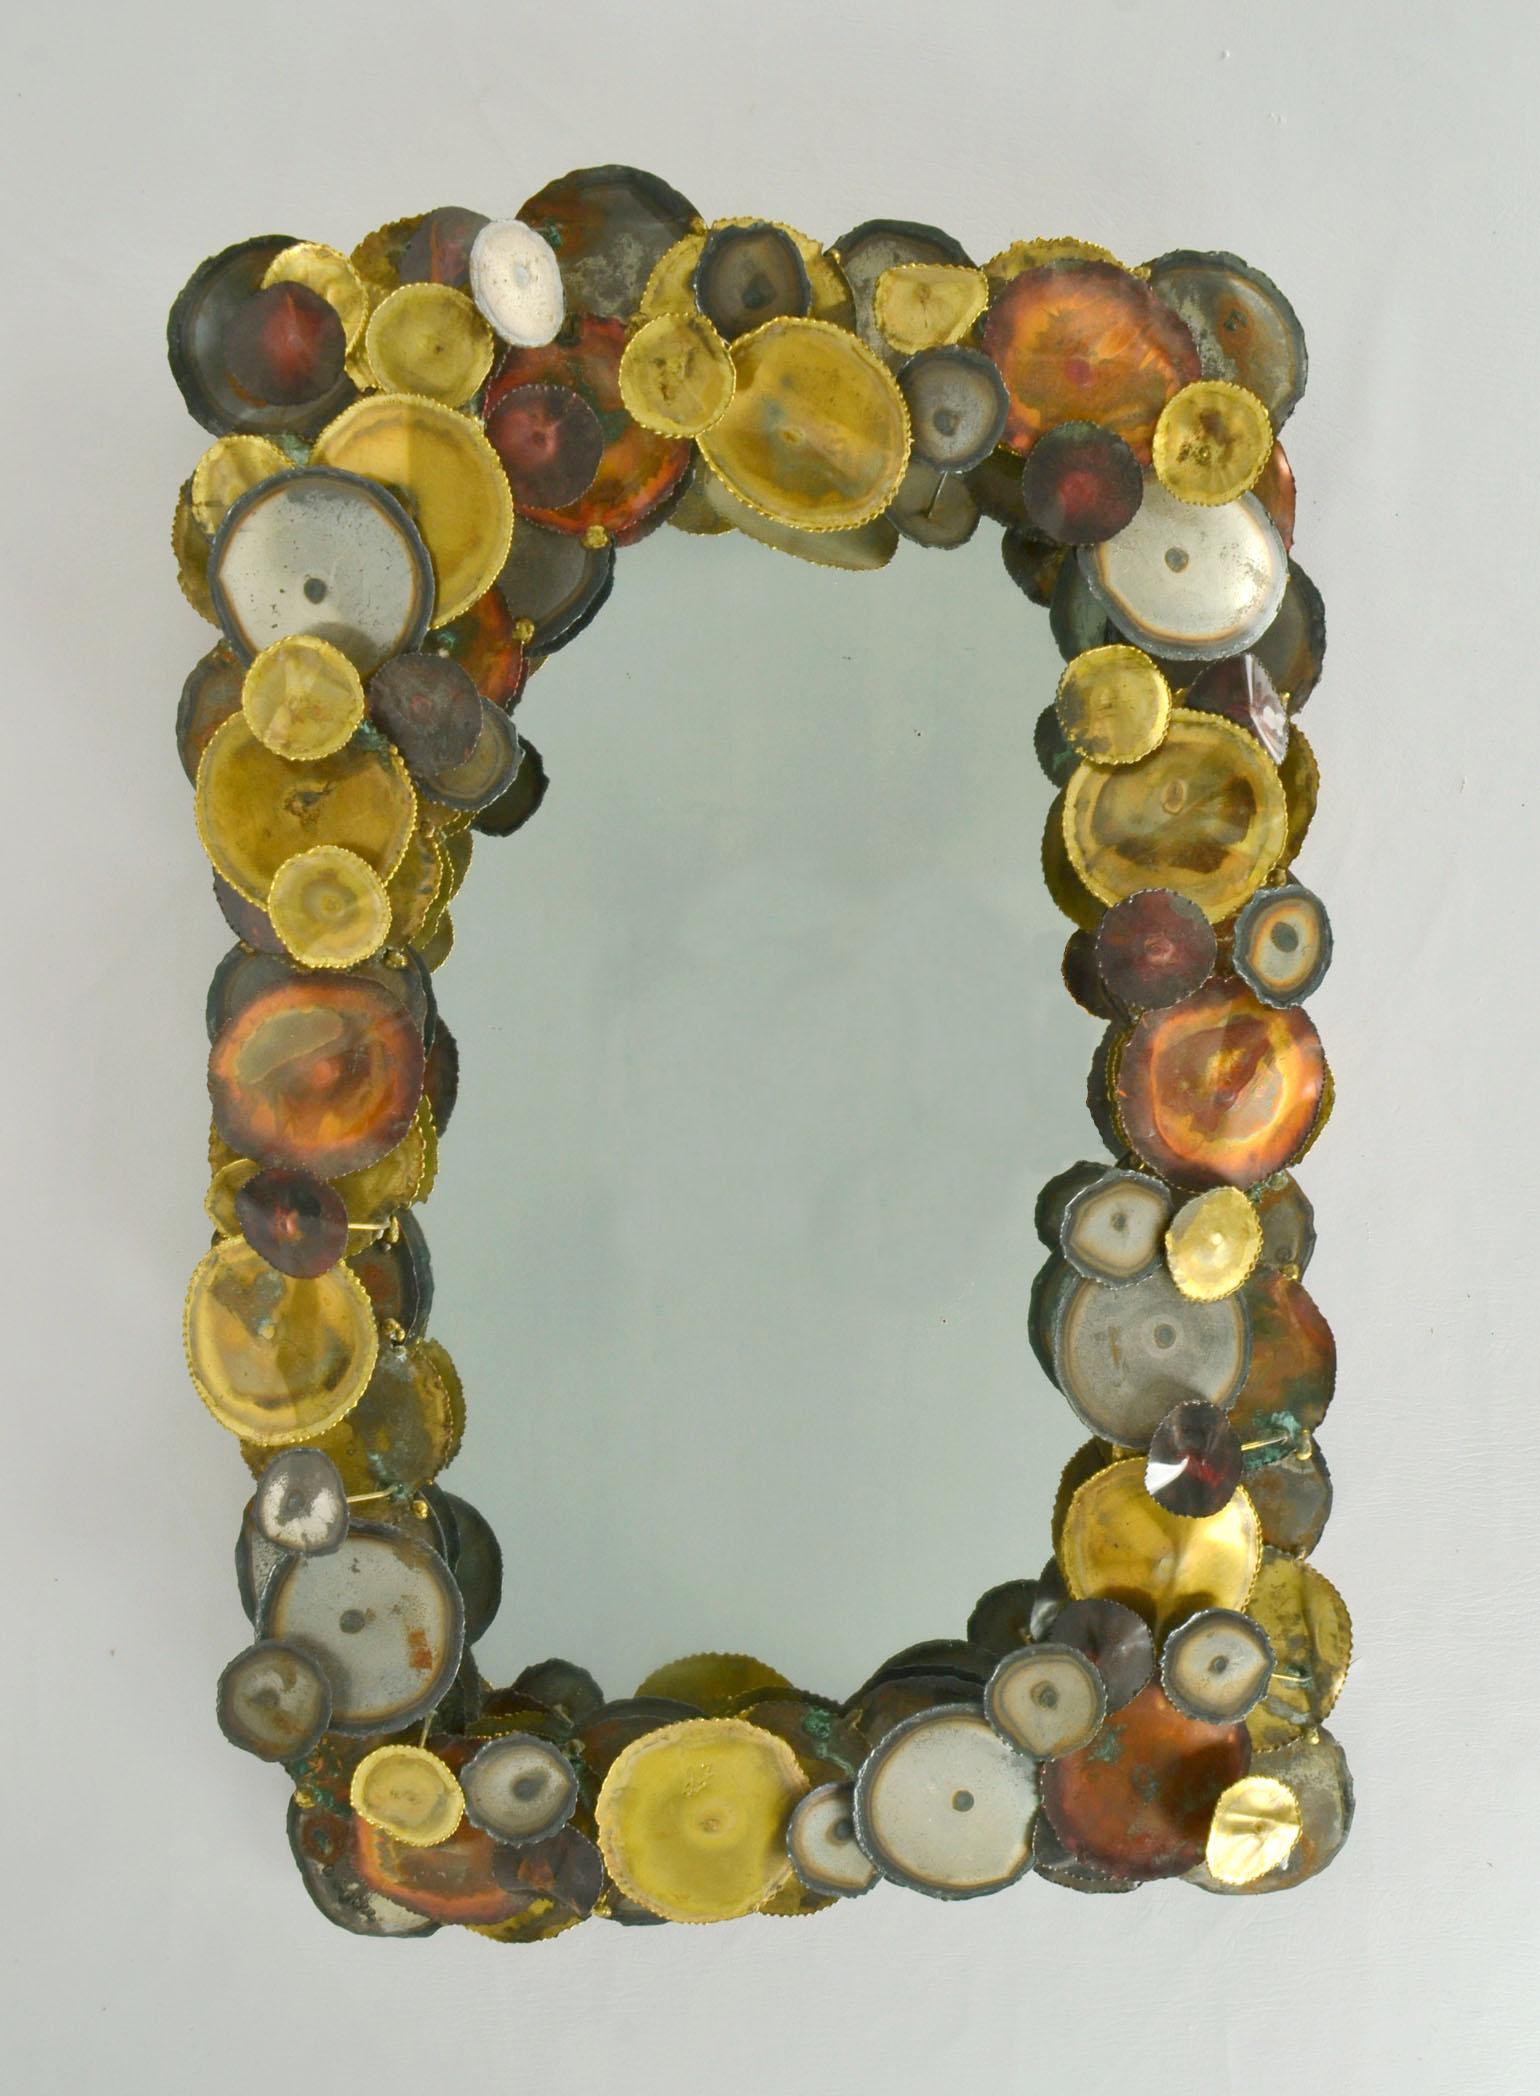 Brutalist rectangular wall mirror in the style of Curtis Jere with relief border in hand torched circles of brass and mild steel suspended randomly around the mirror. The mirror is made in the 1970's and is signed FG.